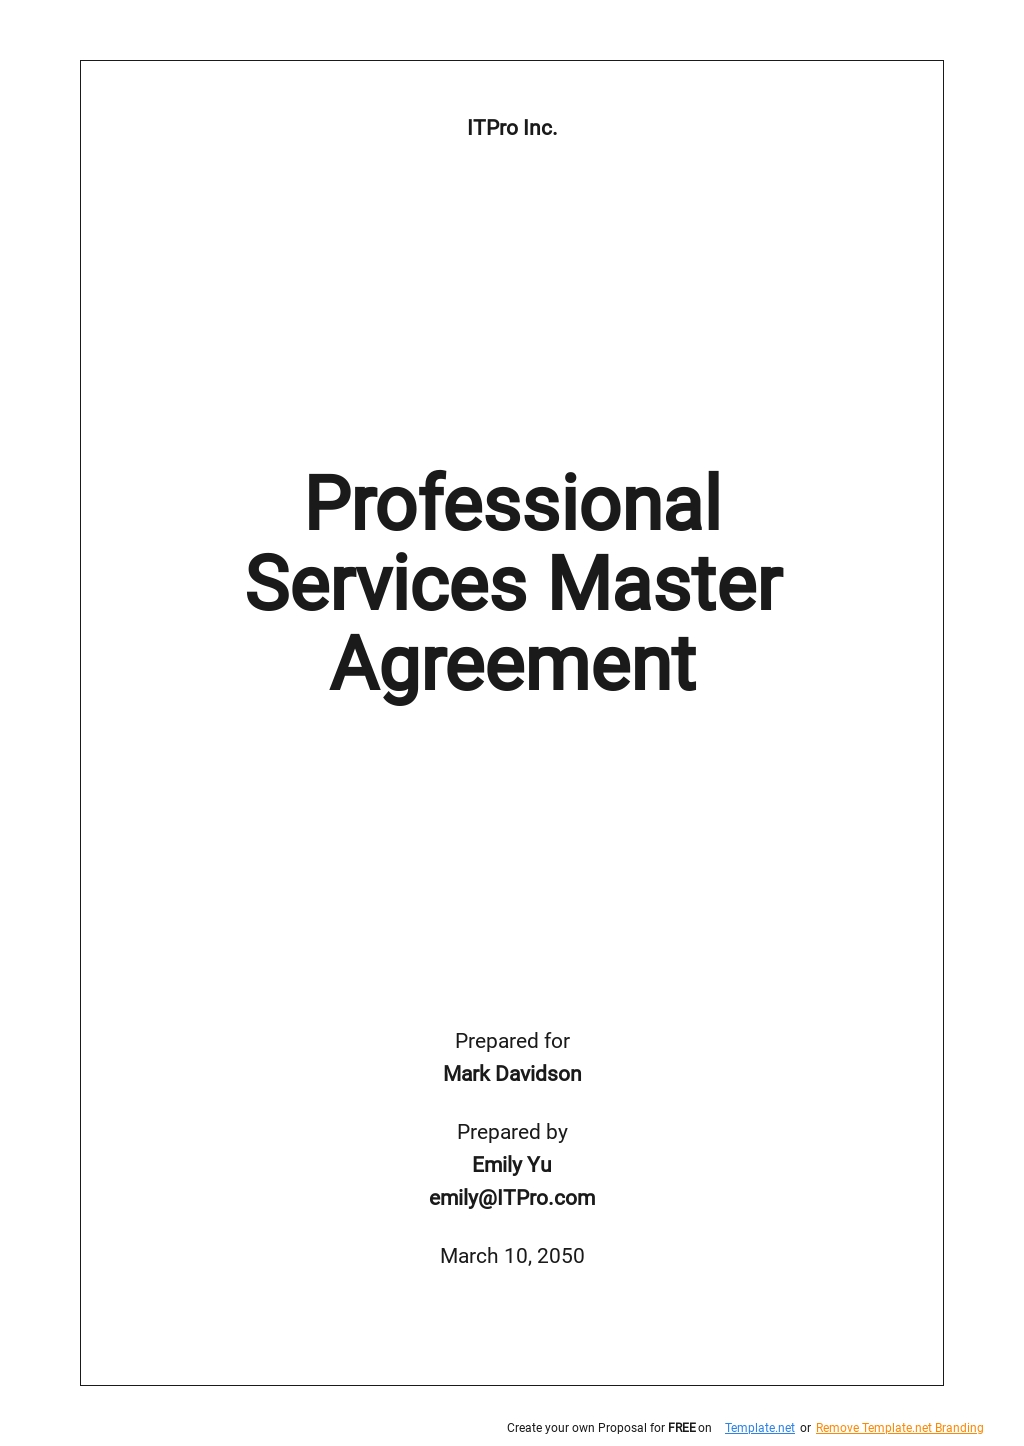 Professional Services Master Agreement Template.jpe